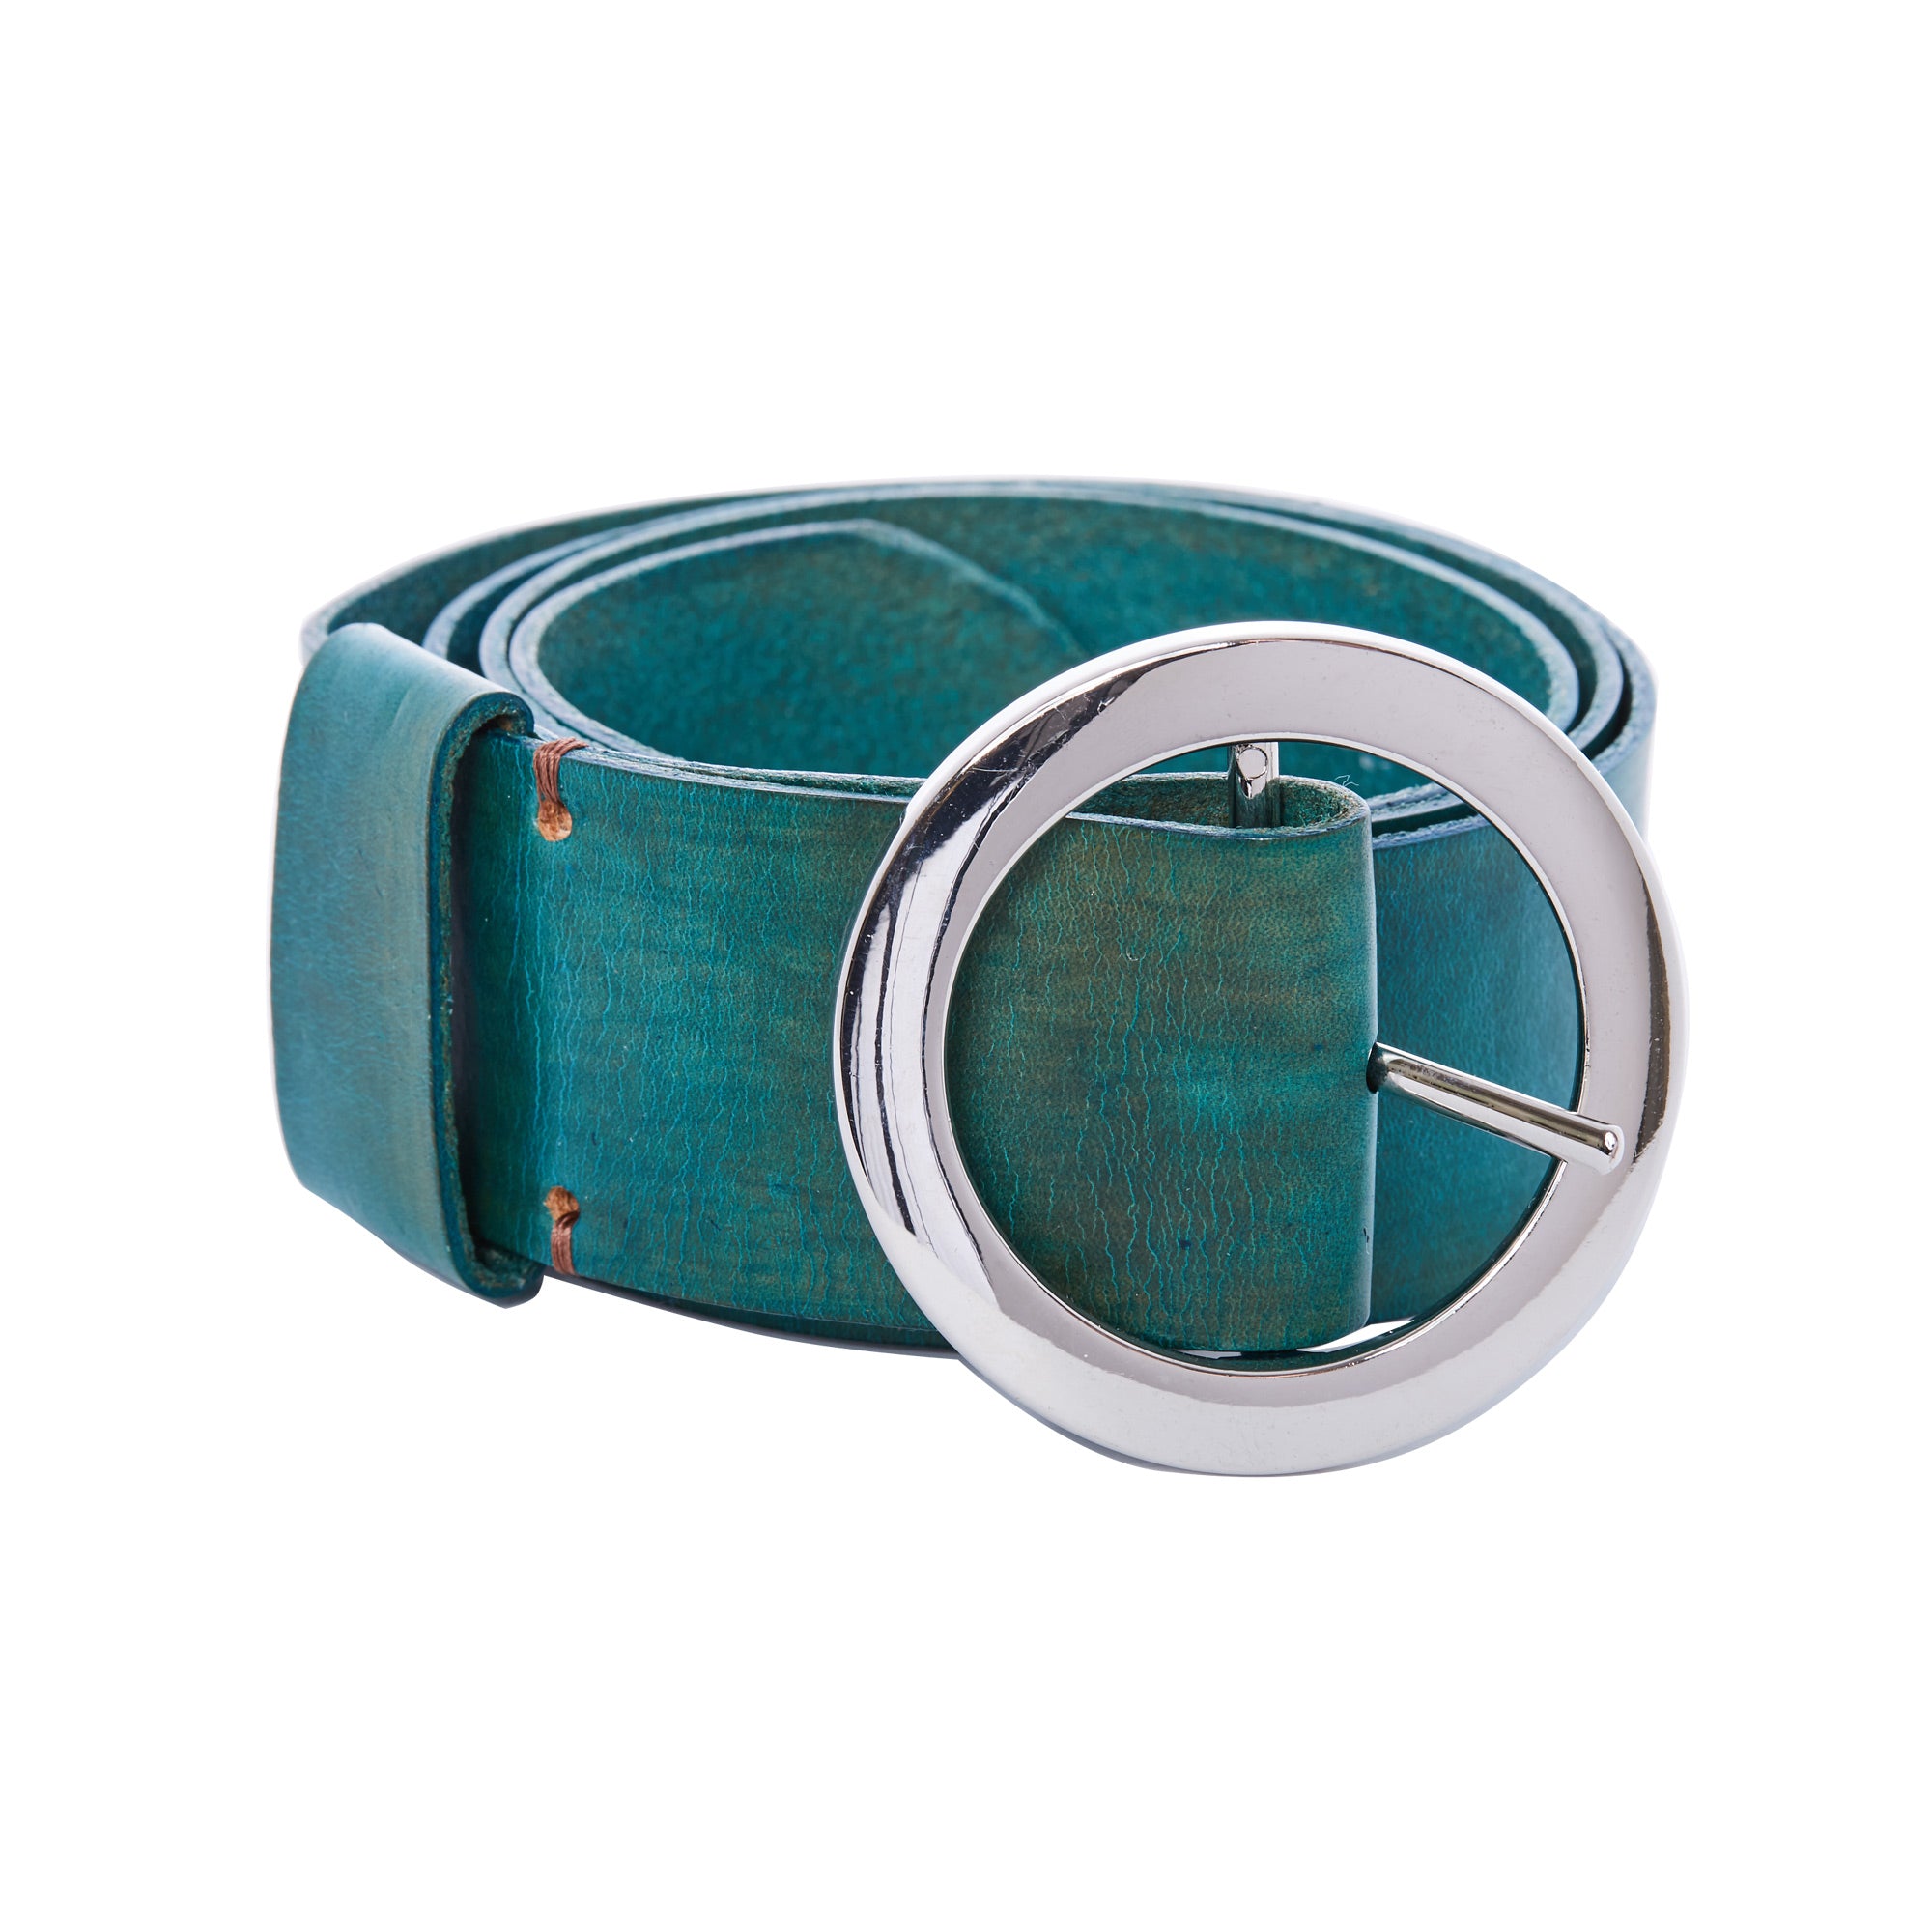 Odell 1 3/4in Cinch Belt - Available in More Colors